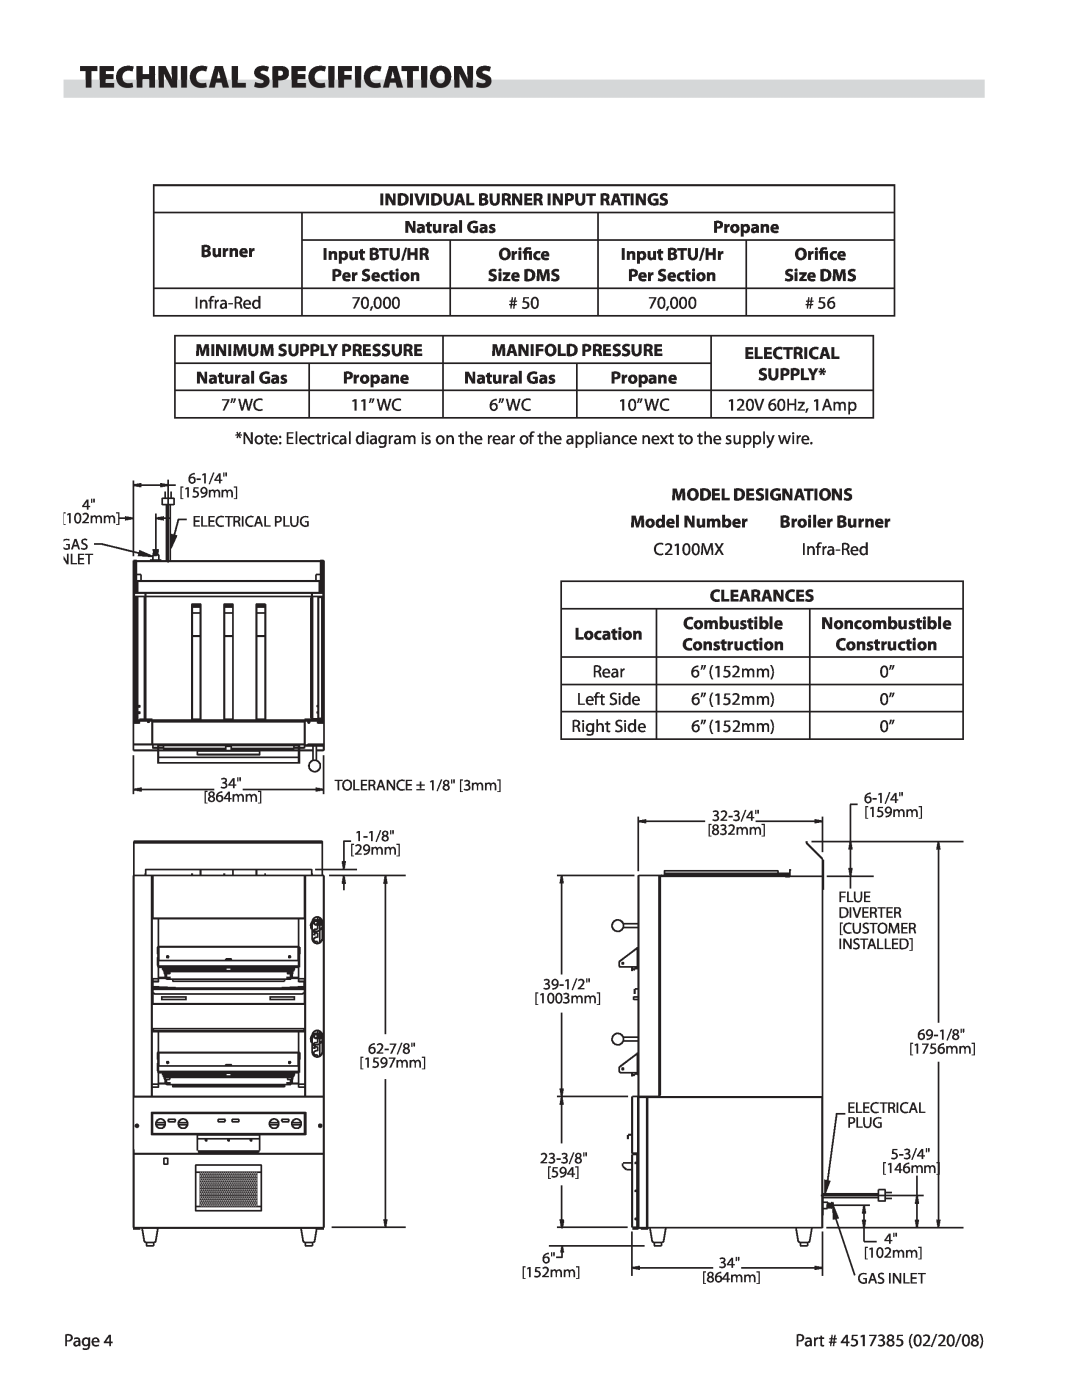 Garland Broiler operation manual Technical Specifications, Gas Inlet 